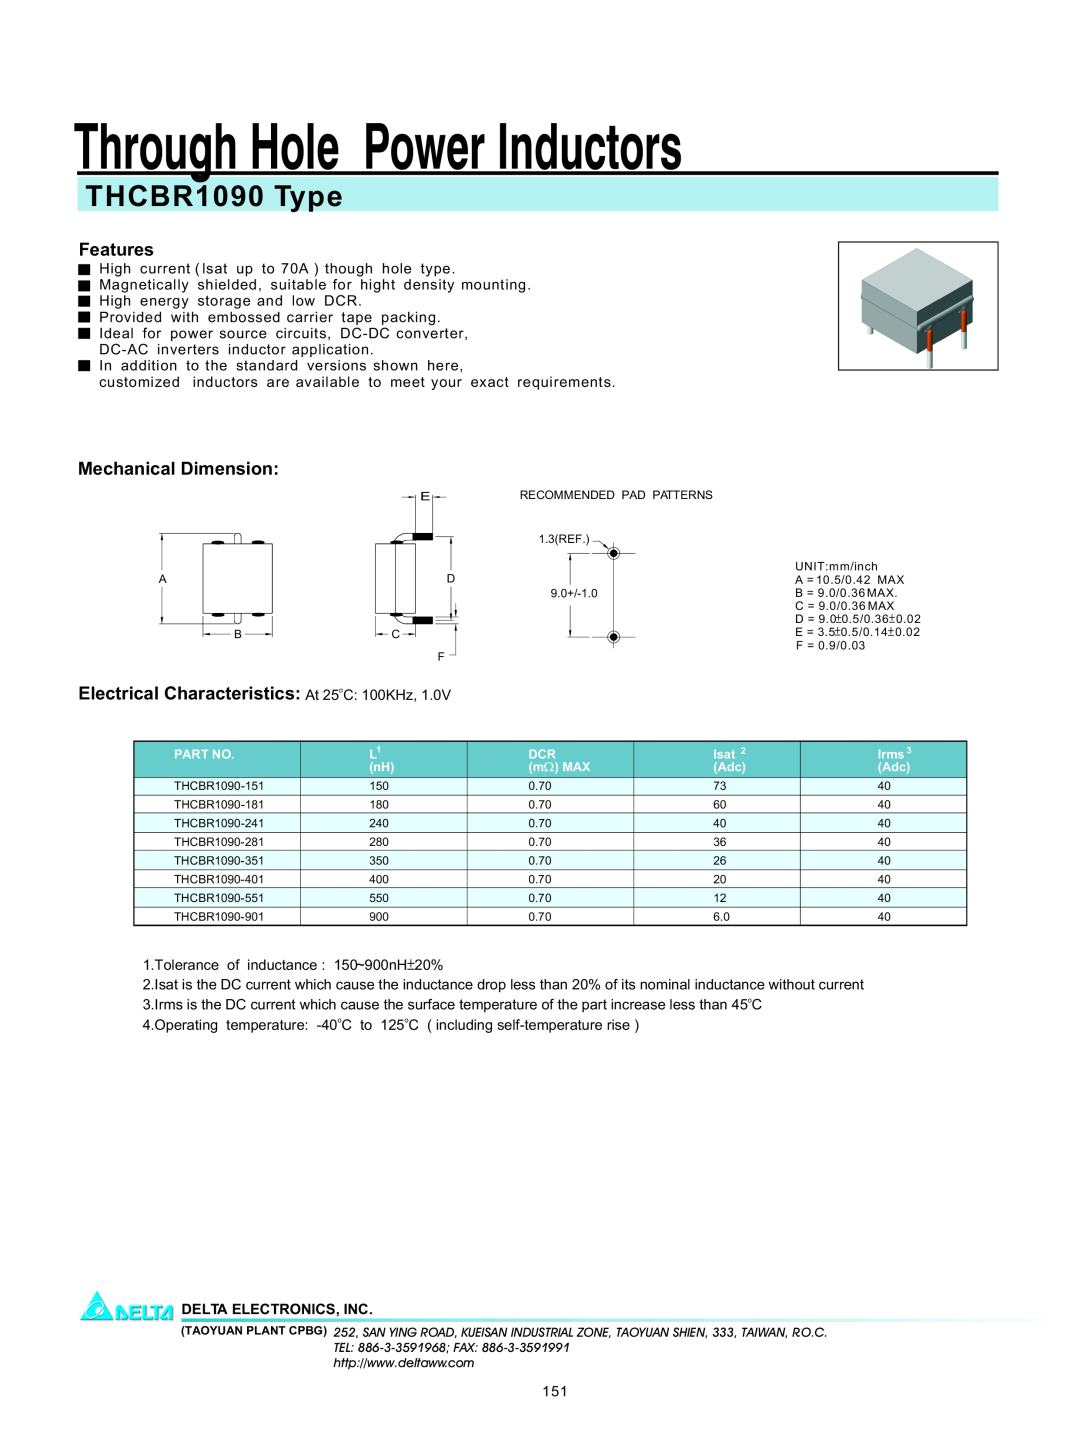 Delta Electronics manual Through Hole Power Inductors, THCBR1090 Type, Features, Mechanical Dimension 